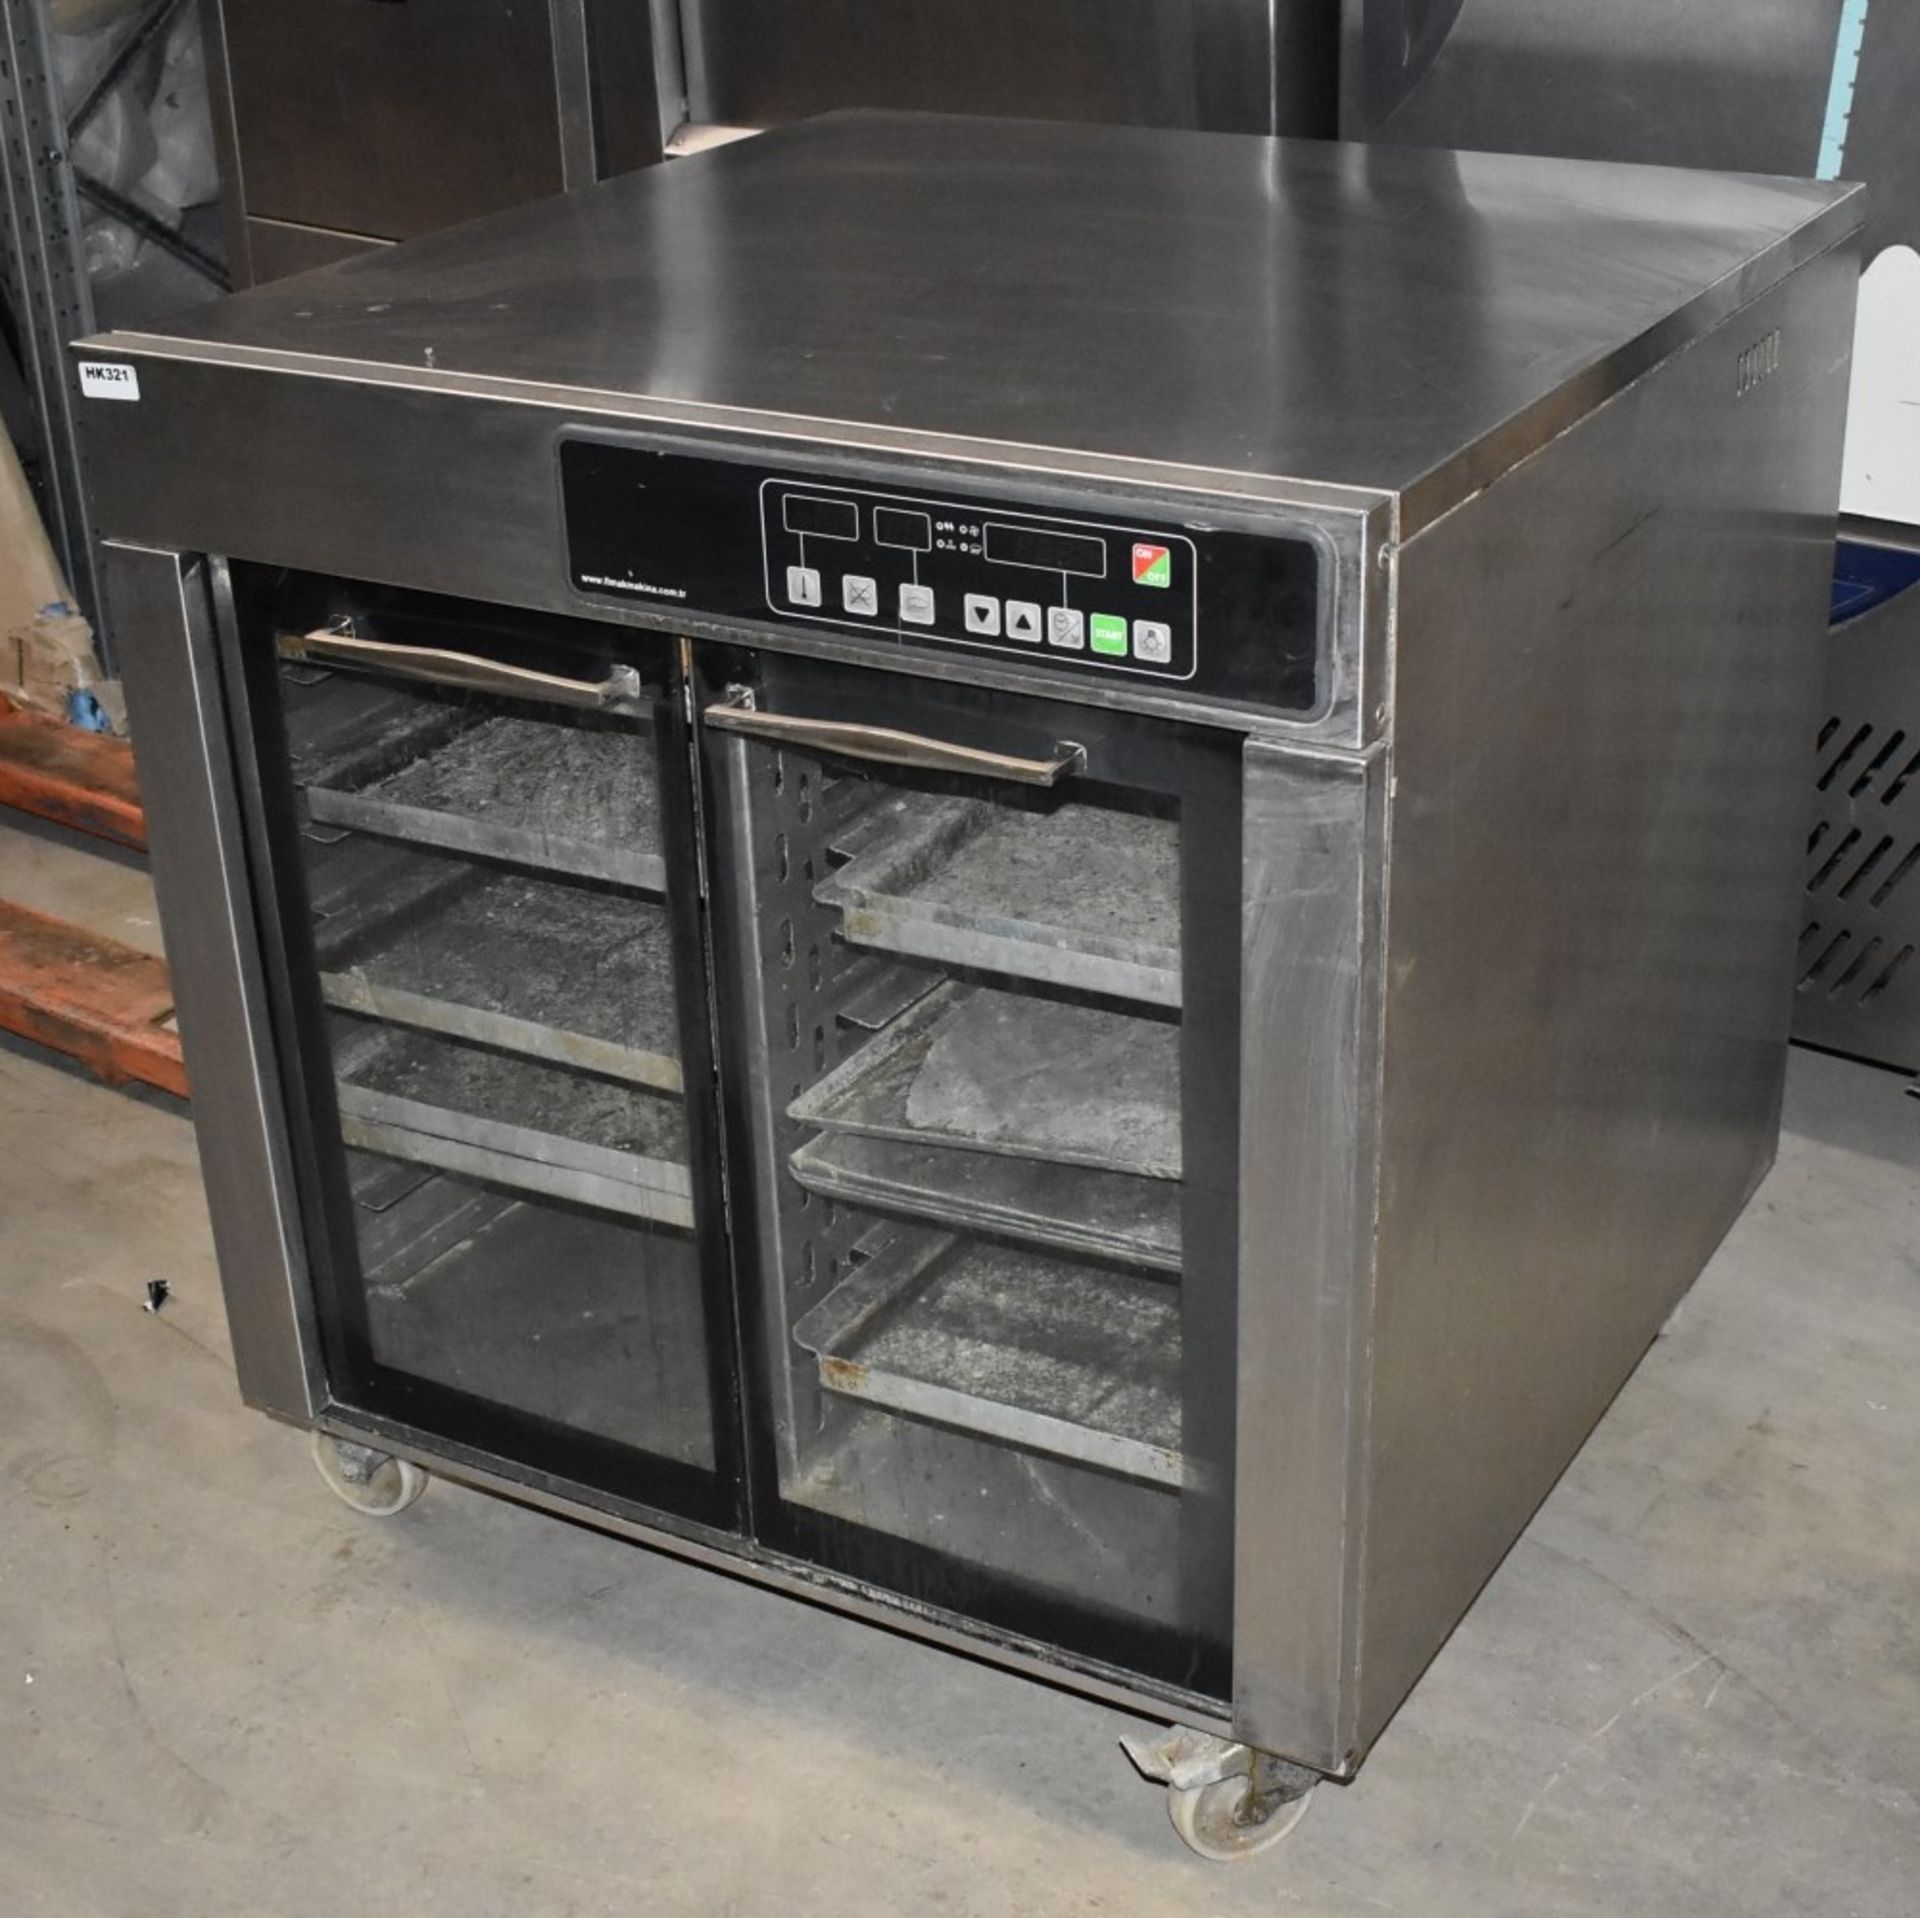 1 x FiMAK Windrose FW10 Convection Baking Oven - 240v - Size: 95 x 95 x 95 cms - Ref : HK321 WH2 B5G - Image 3 of 8